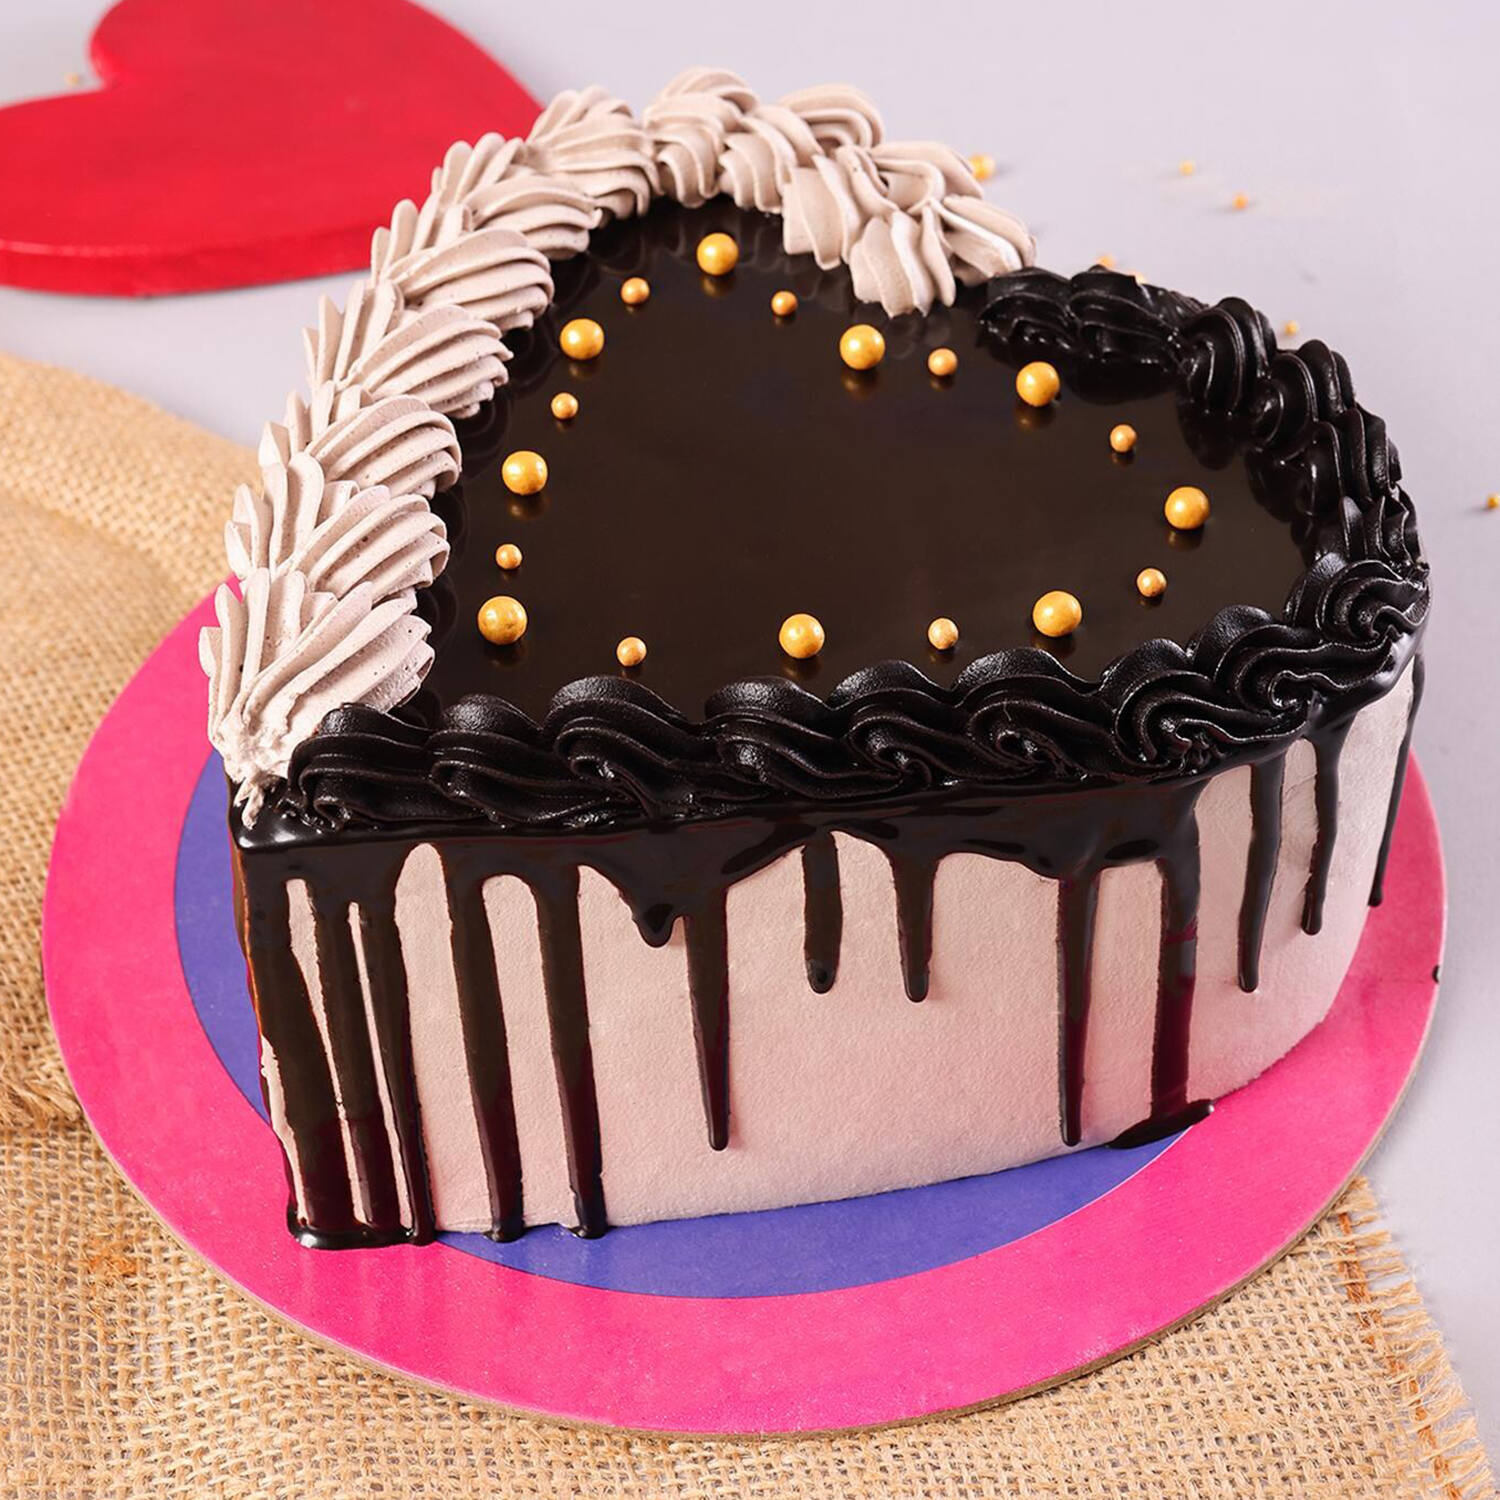 HOW TO MAKE A HEART CAKE - this Valentine's Day for only $6